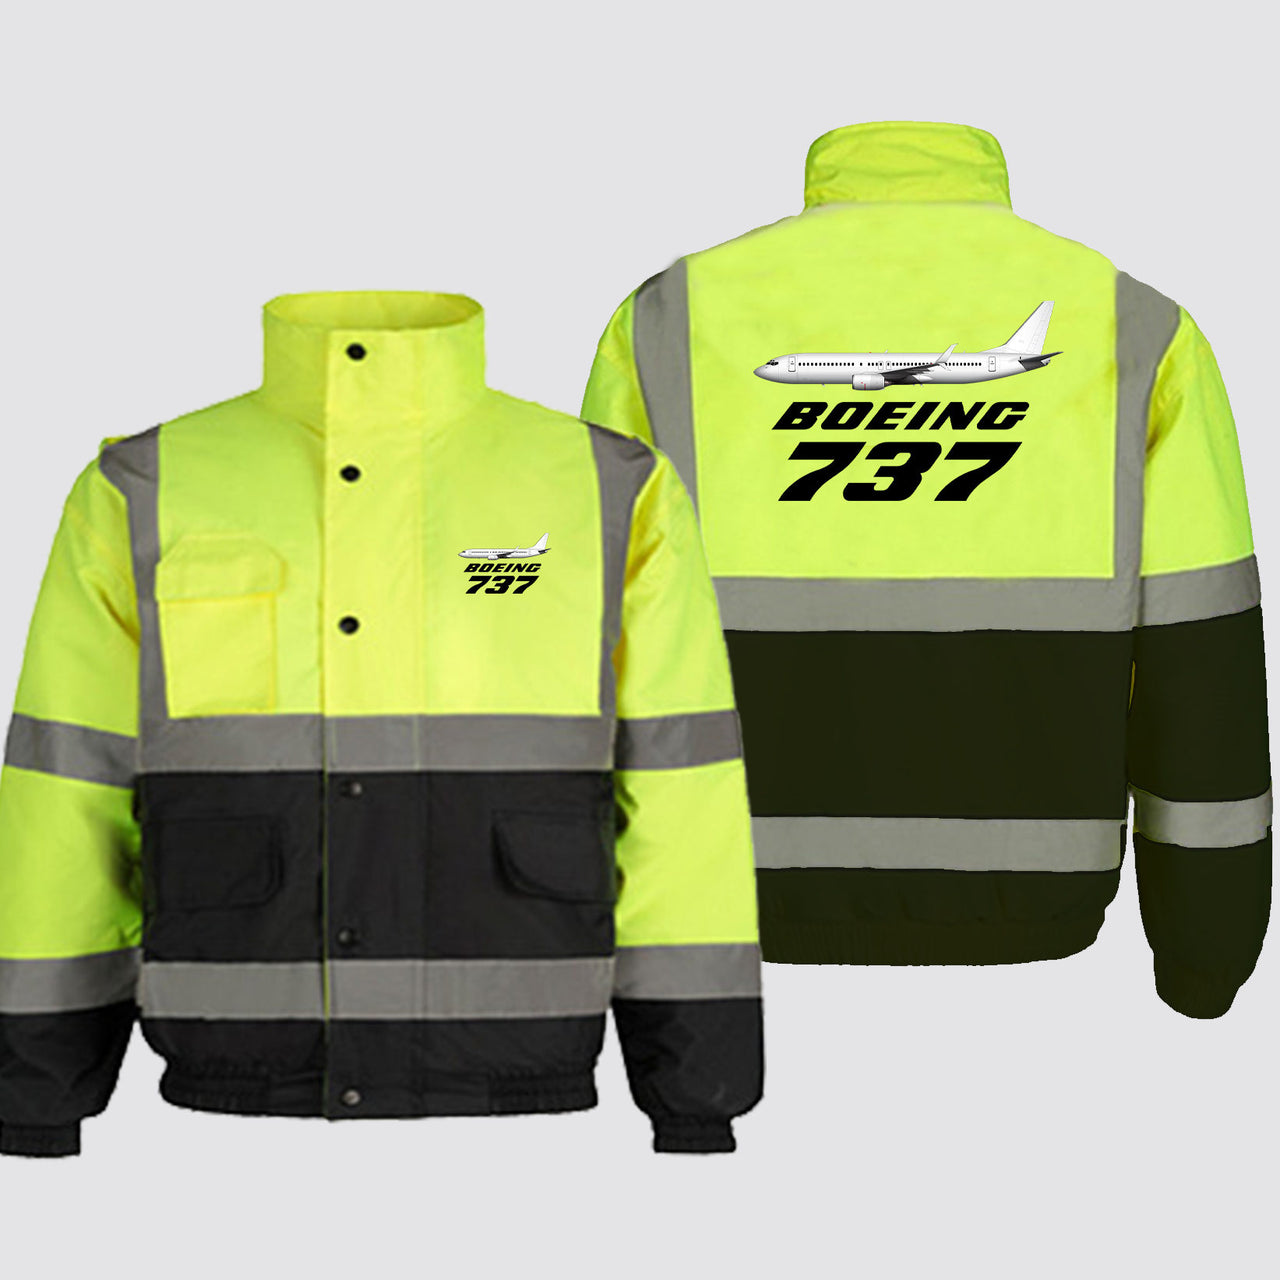 The Boeing 737 Designed Reflective Winter Jackets